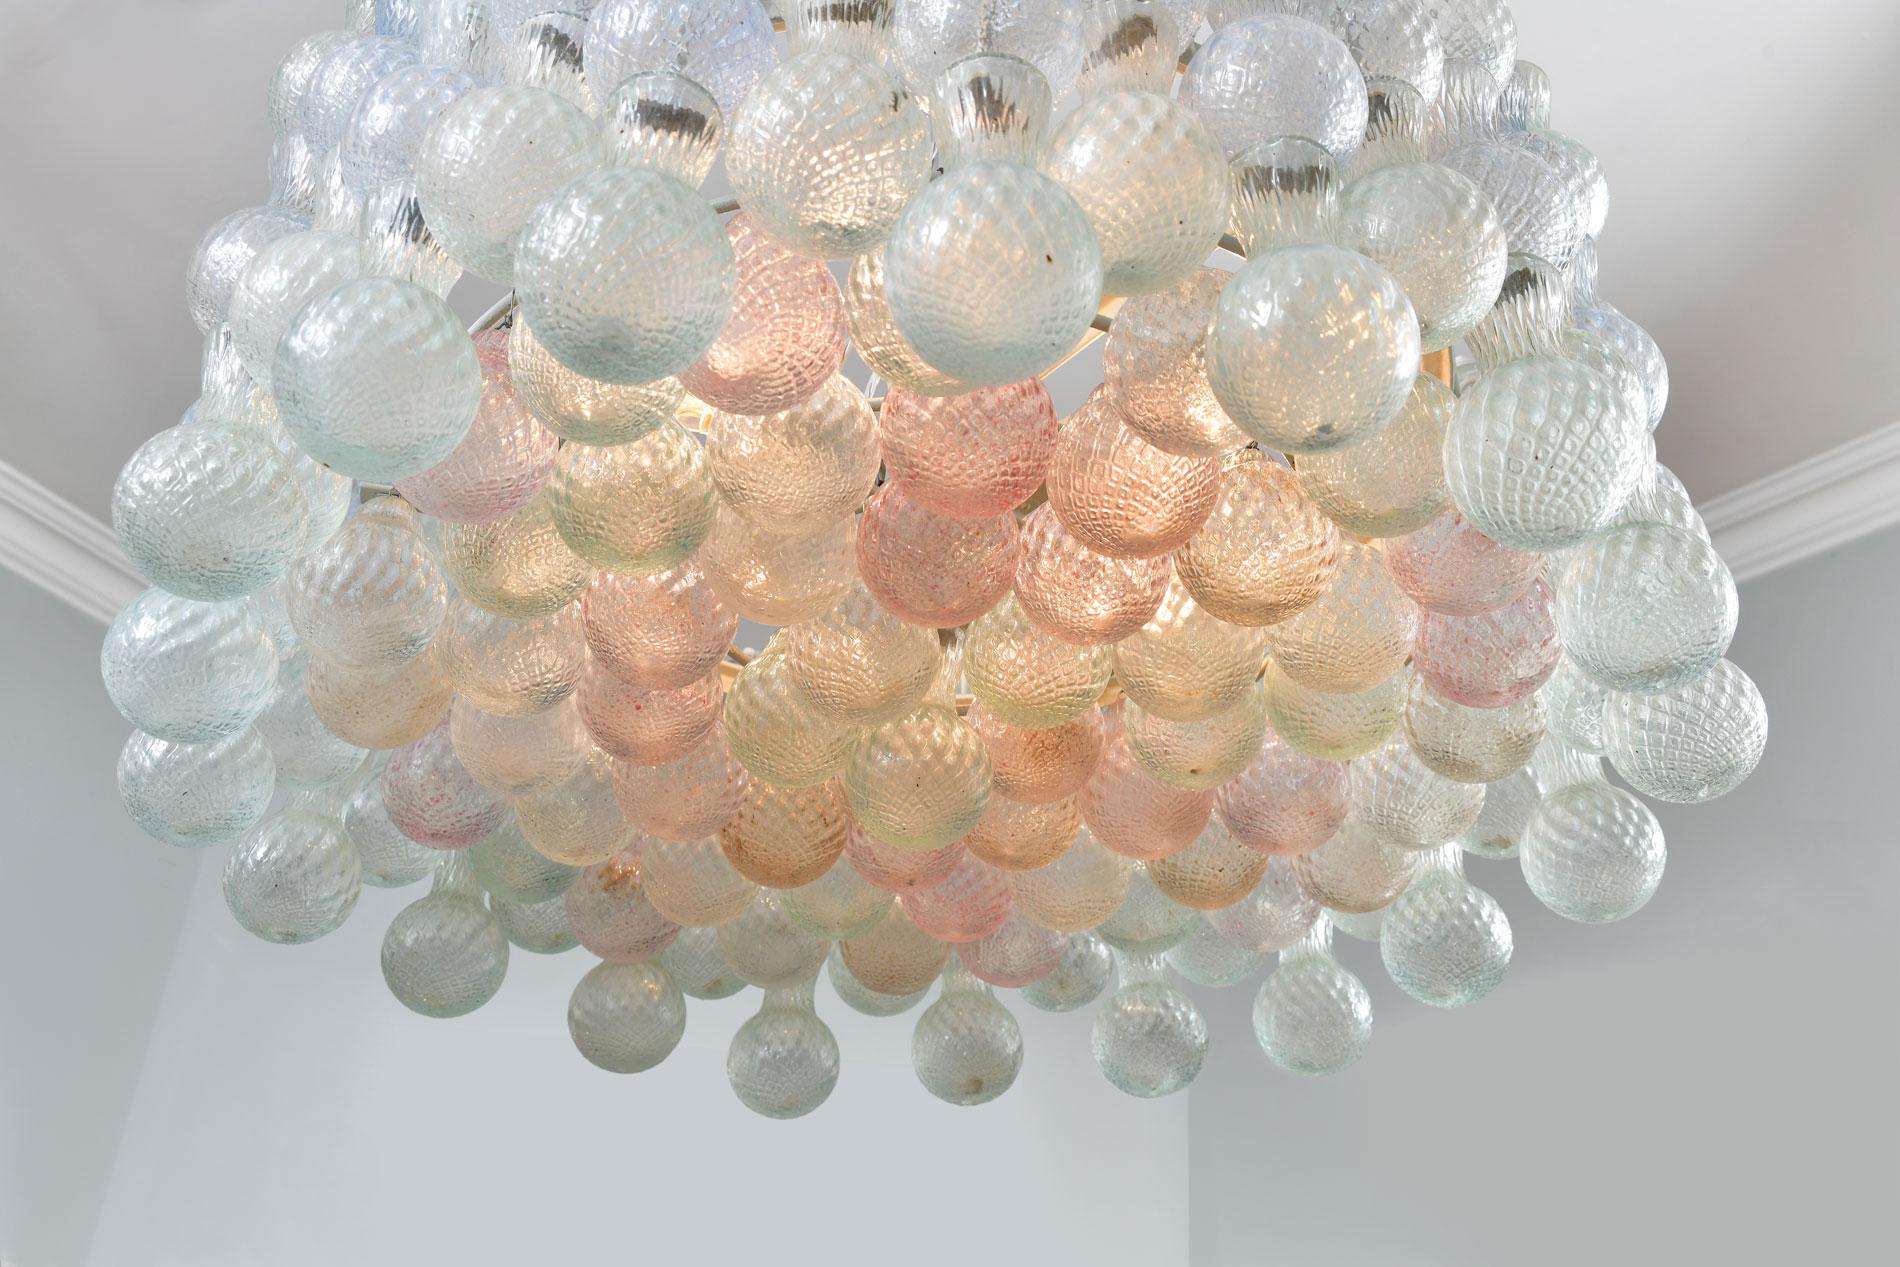 Large and magical midcentury chandelier by the famous Murano glass maker Seguso. The four tiers of textured hand blown glass bubbles are in subtle pastel shades of pink, blue and white.